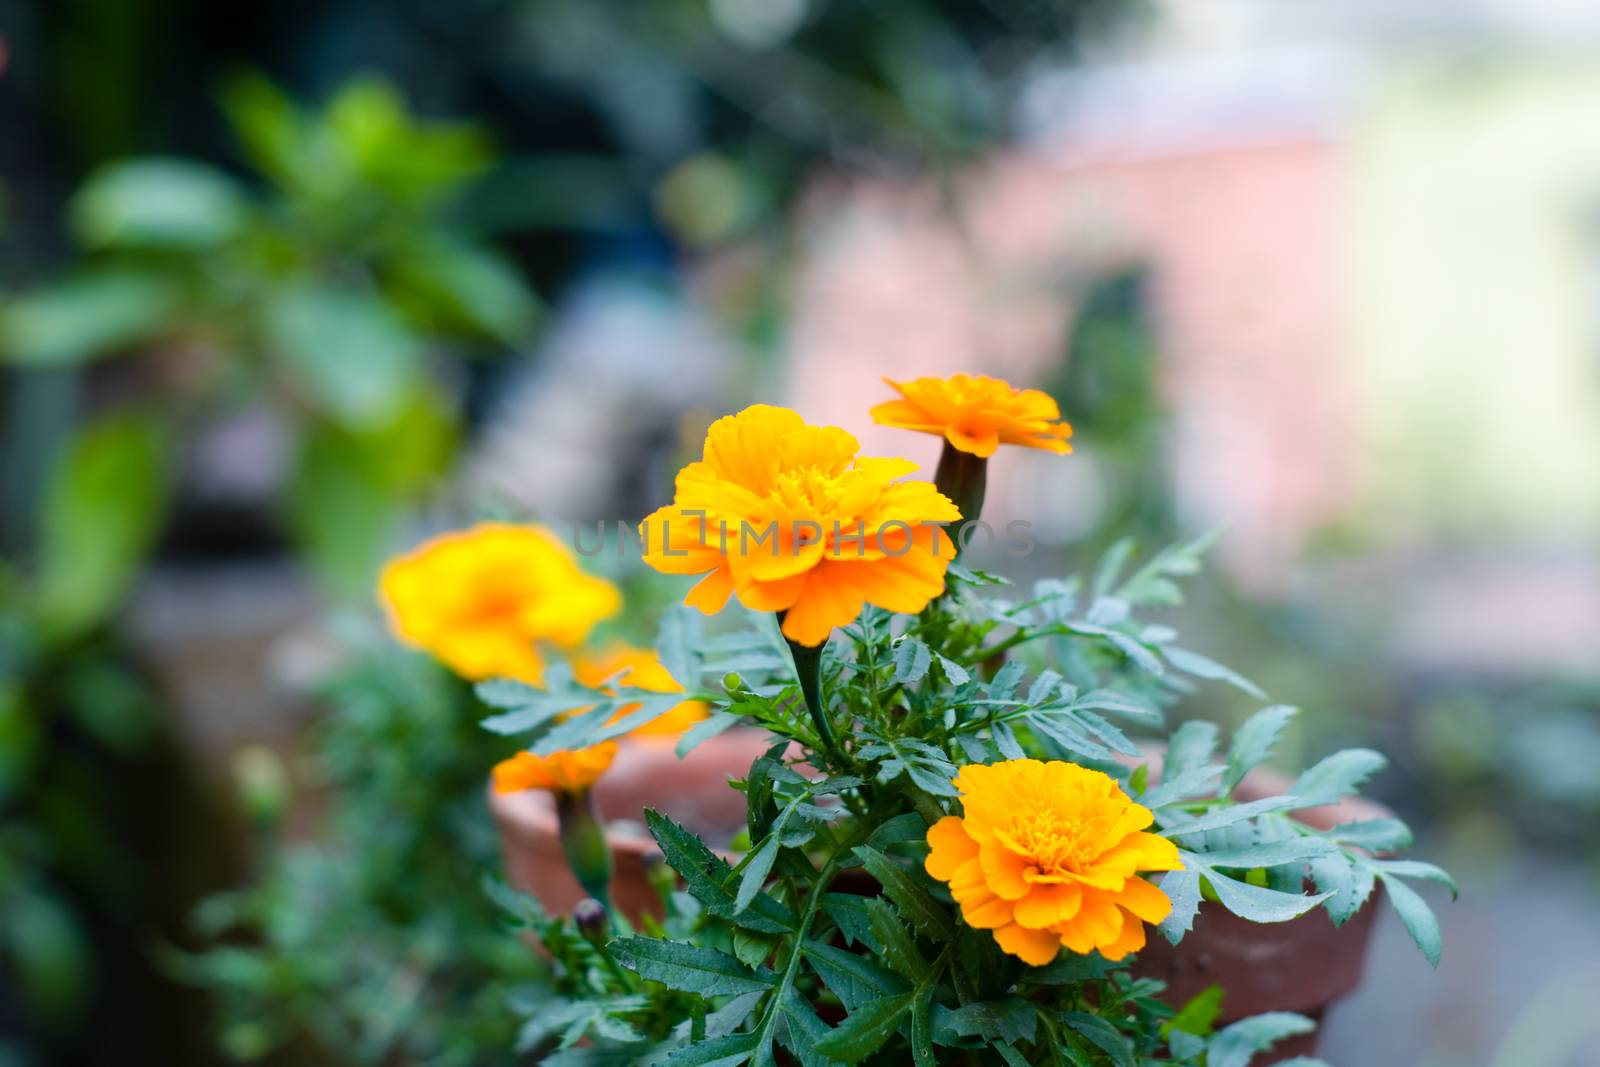 Yellow and orange marigold flowers. Tagetes is a genus or perennial, mostly herbaceous plants in the sunflower family. Naturally Blooms in golden, orange, yellow, white colors, with maroon highlights. by sudiptabhowmick